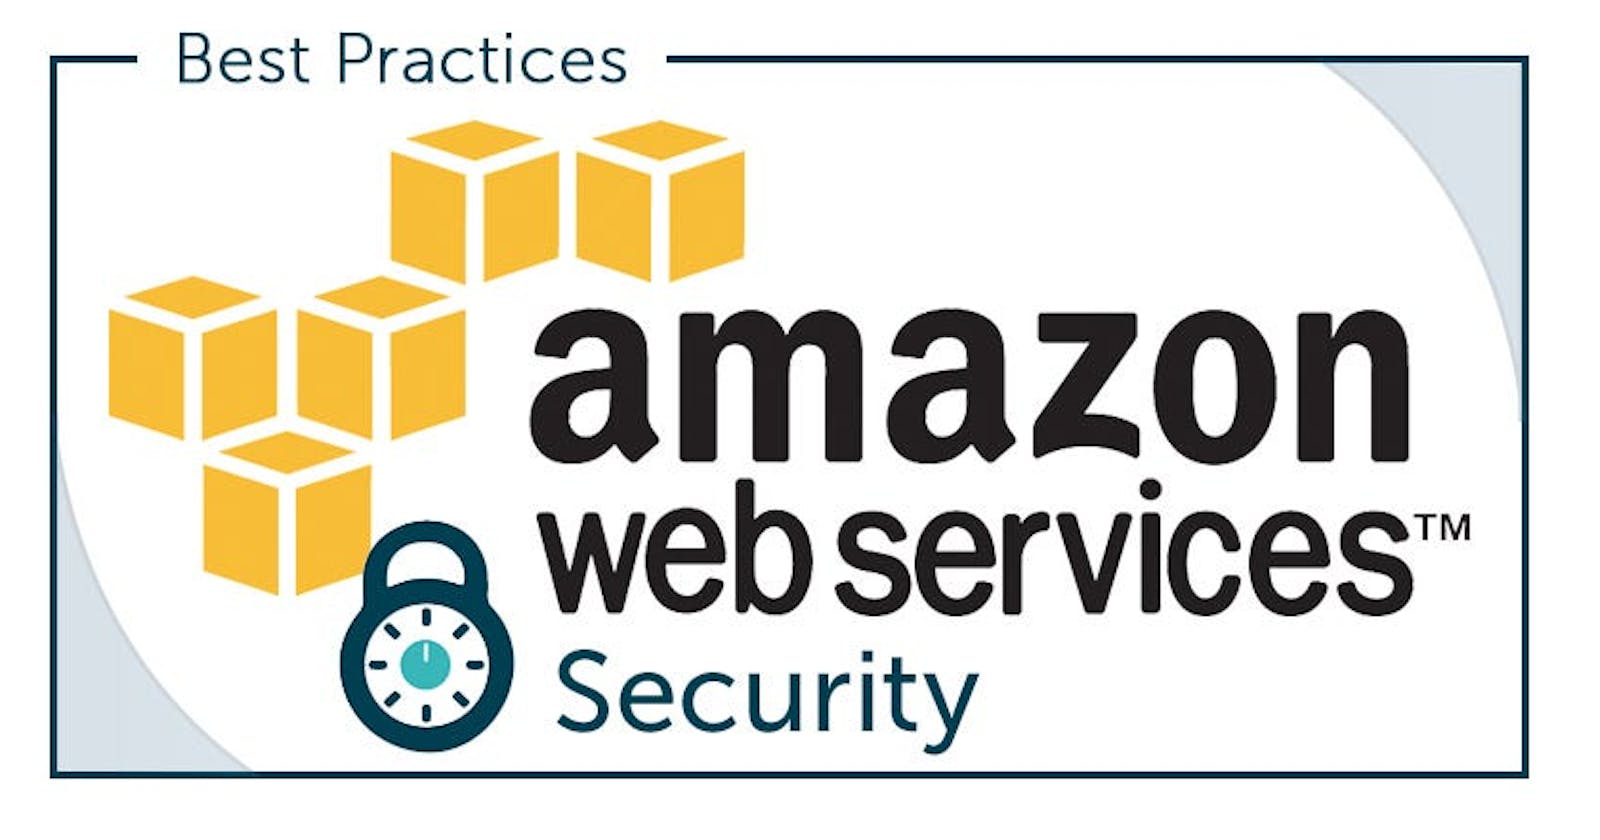 15 Tips to Fortify Your AWS Account Security